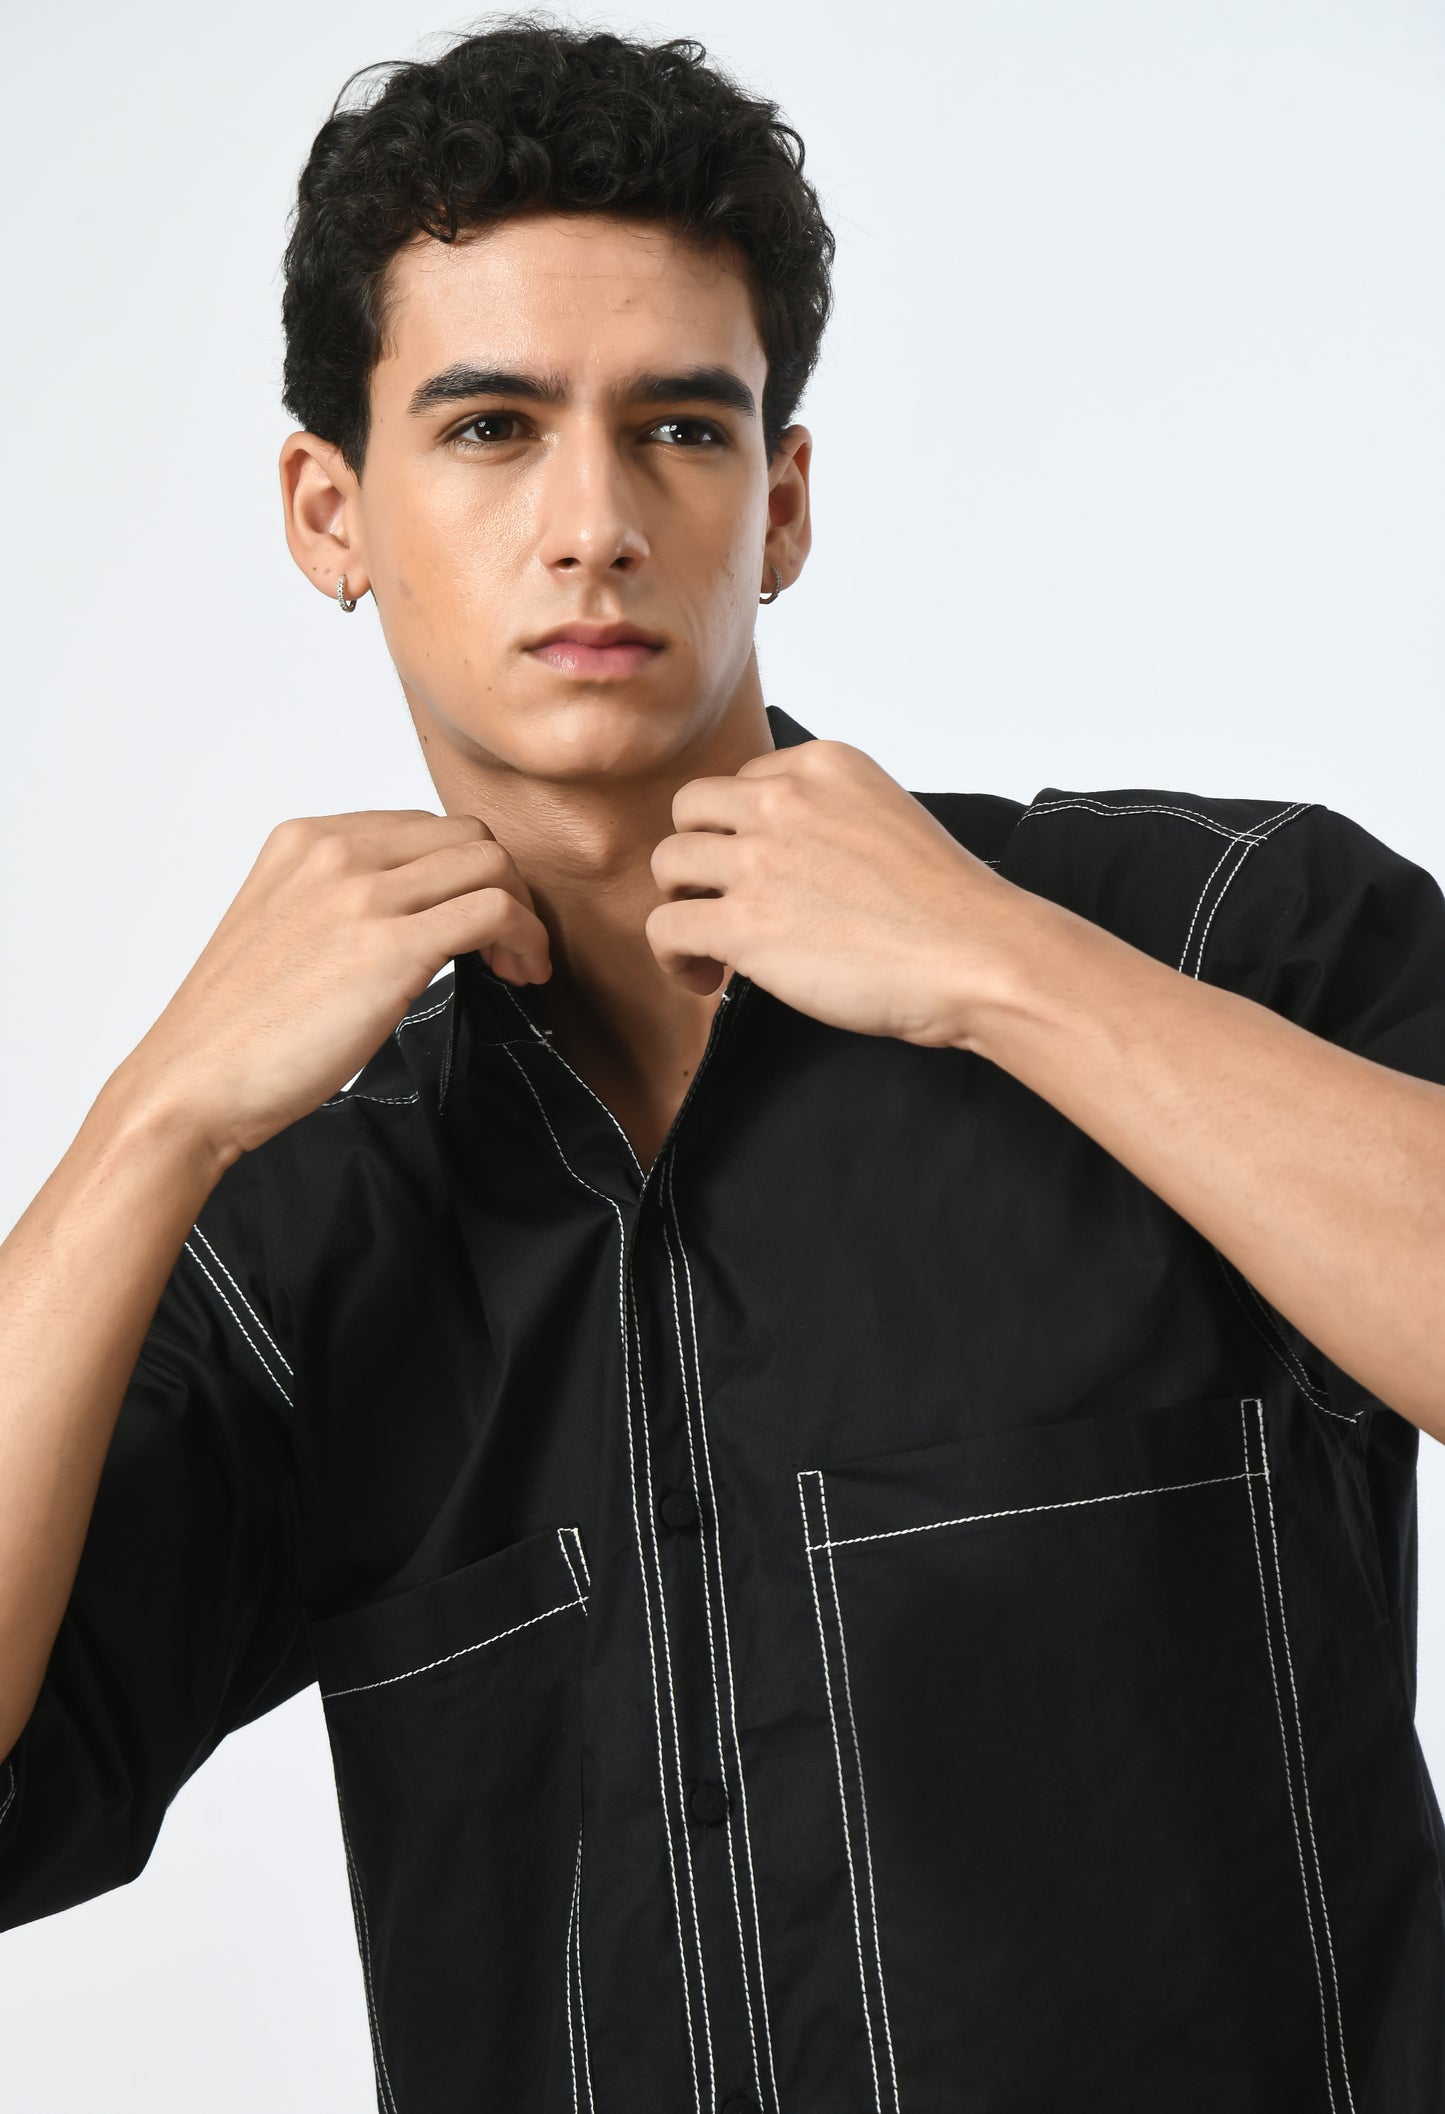 Black unisex shirt with a classic collar.